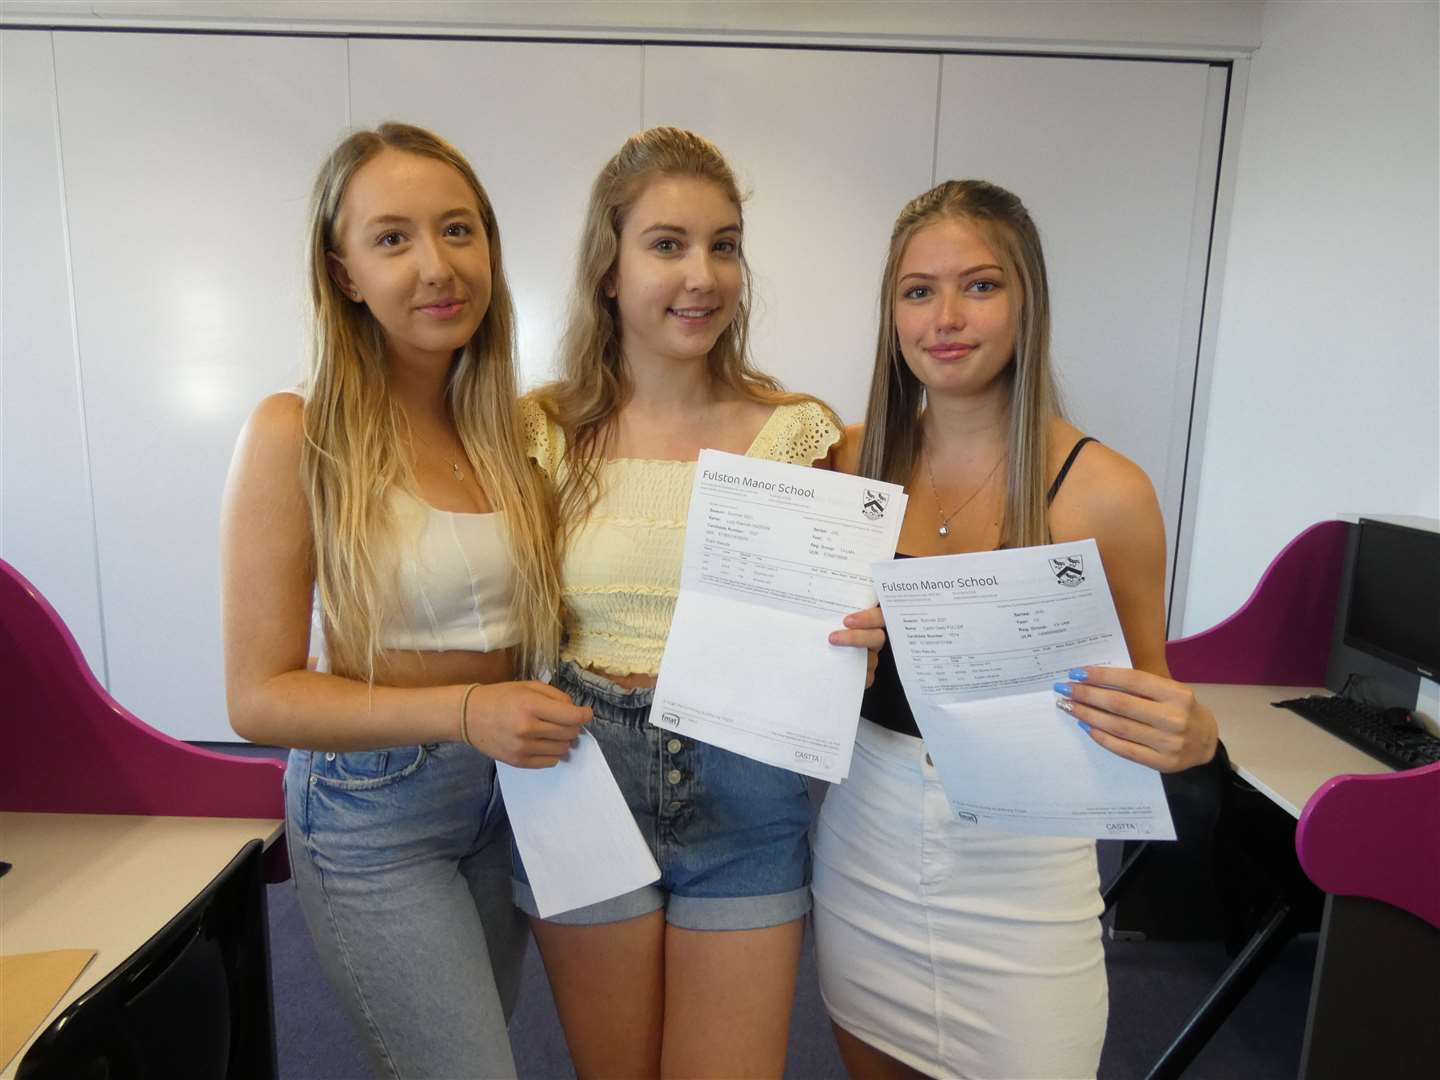 Fulston Manor pupils, from the left, Laura Hunt, Caitlin Fuller and Lucy Hudson celebrating their A-level results